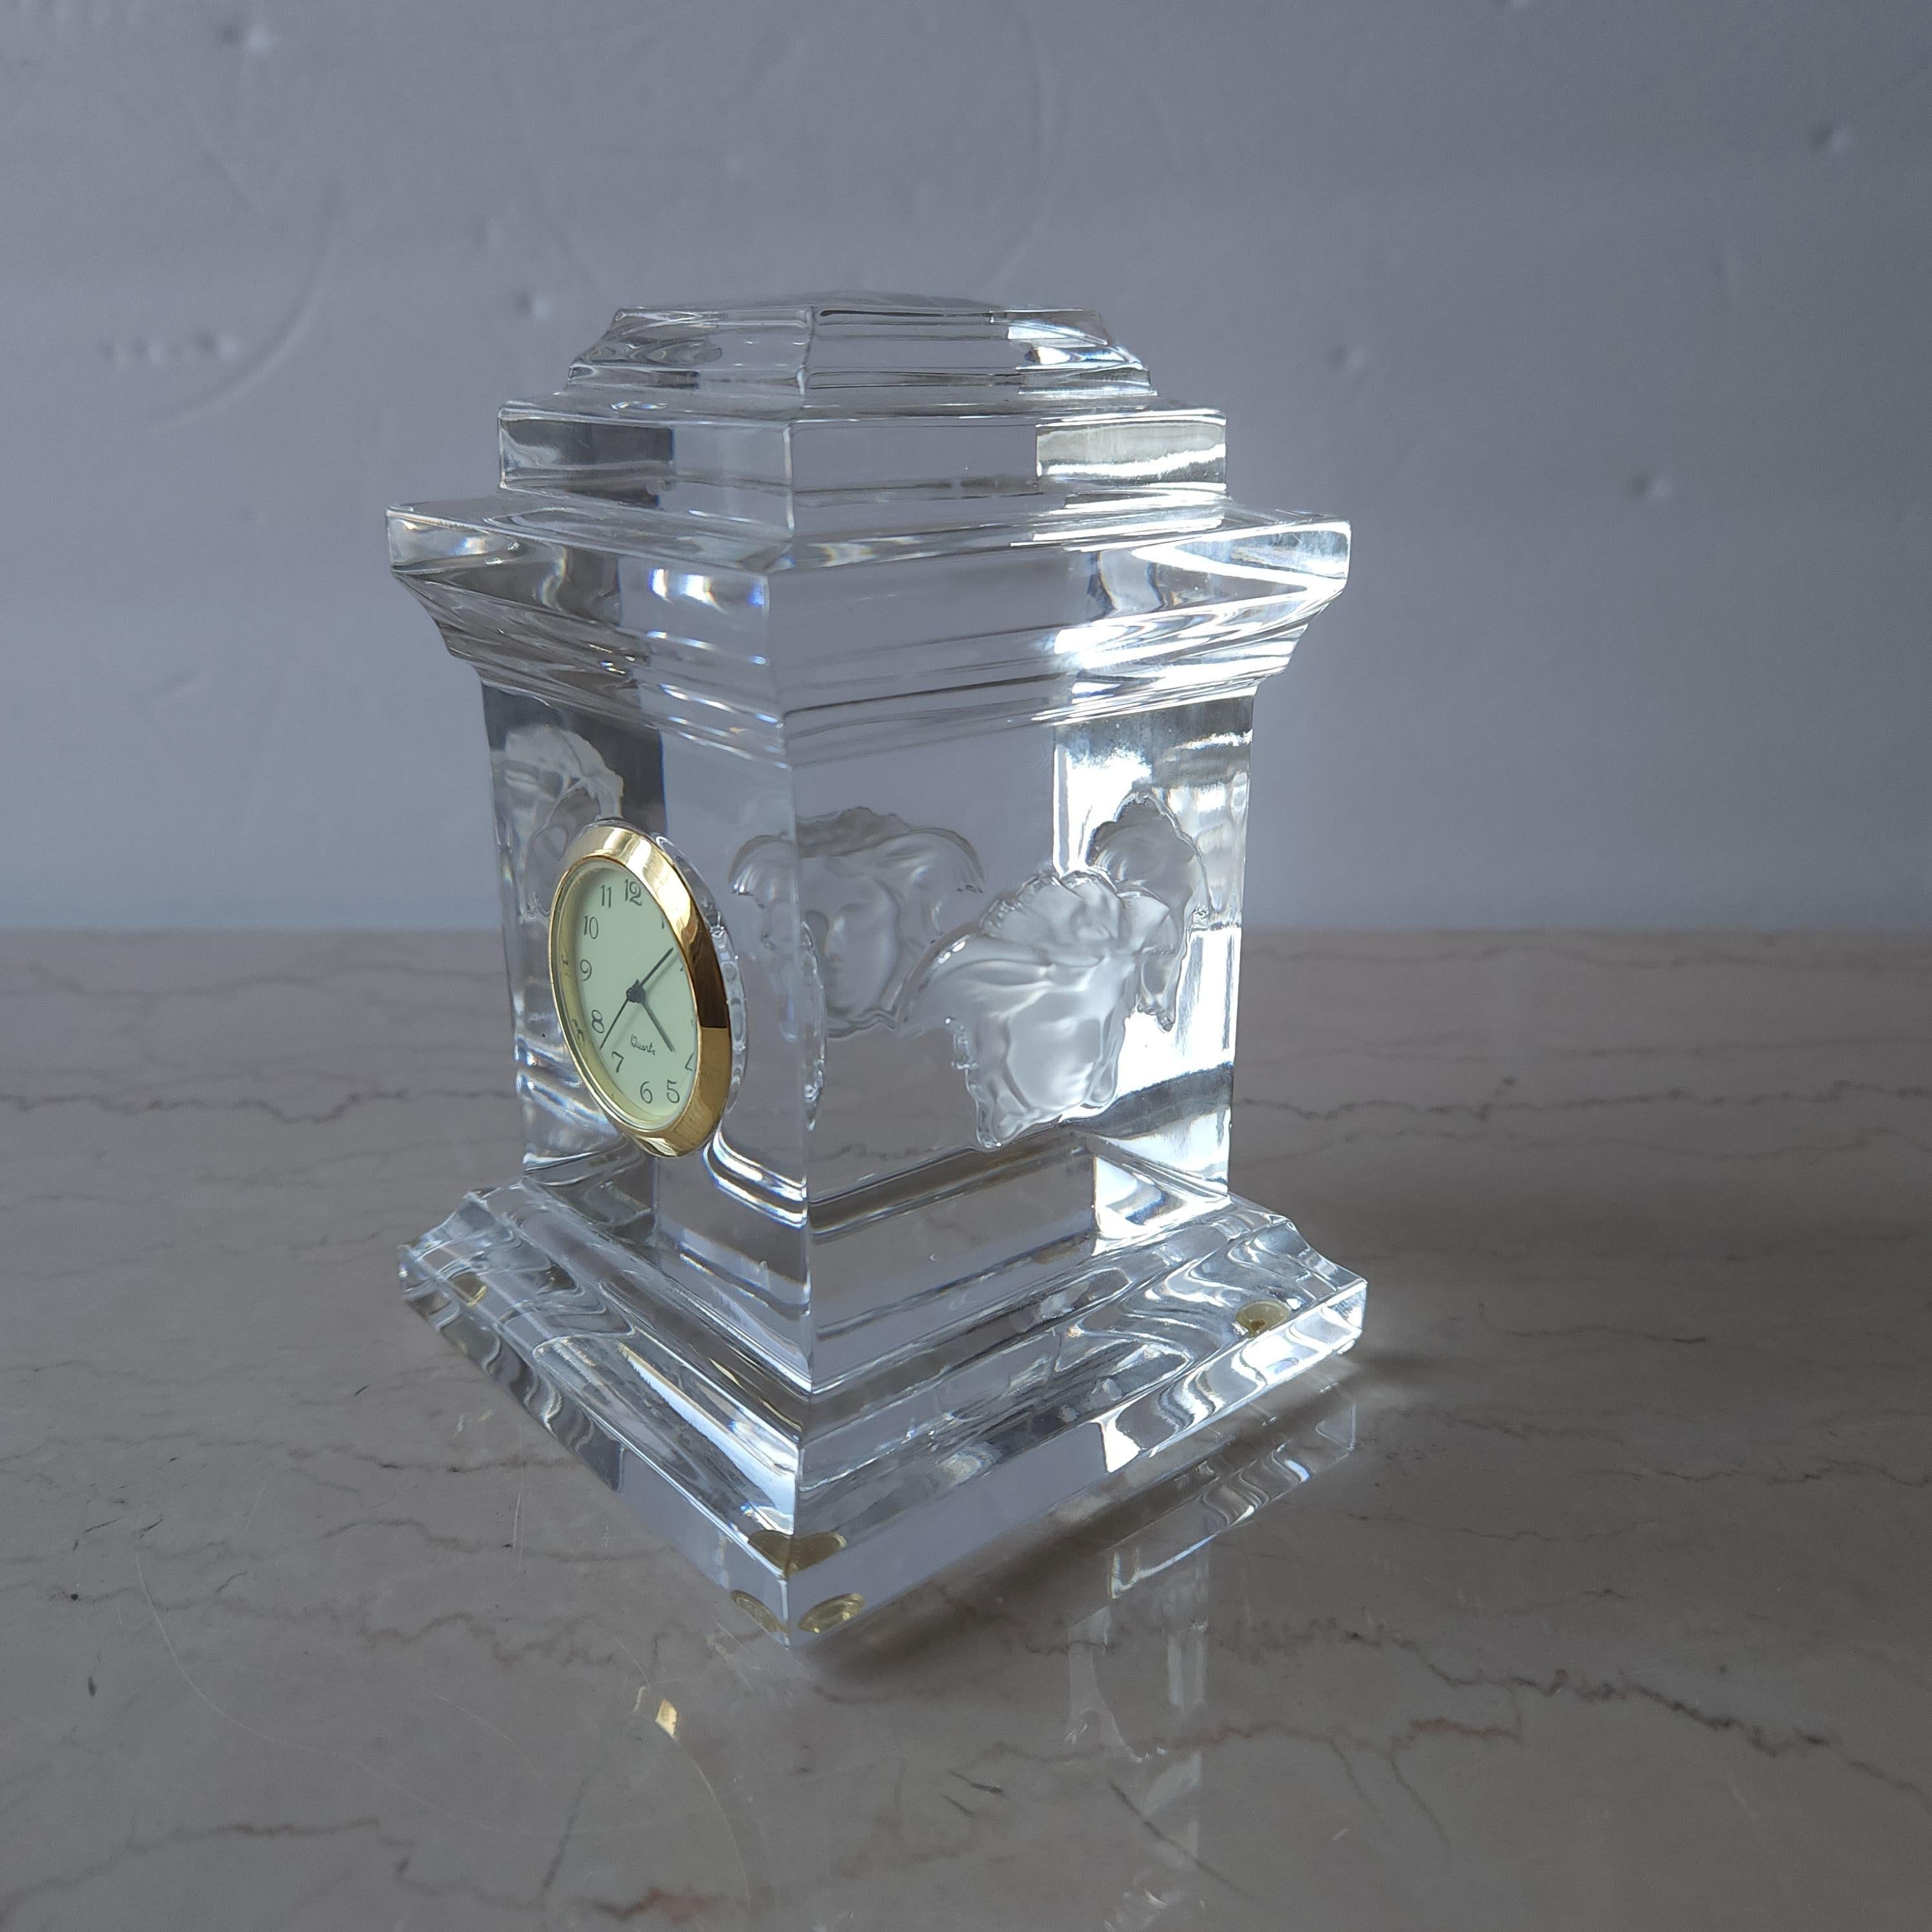 Italian 1980s Versace Medusa Desk Clock by Rosenthal in Lumiere Crystal Glass